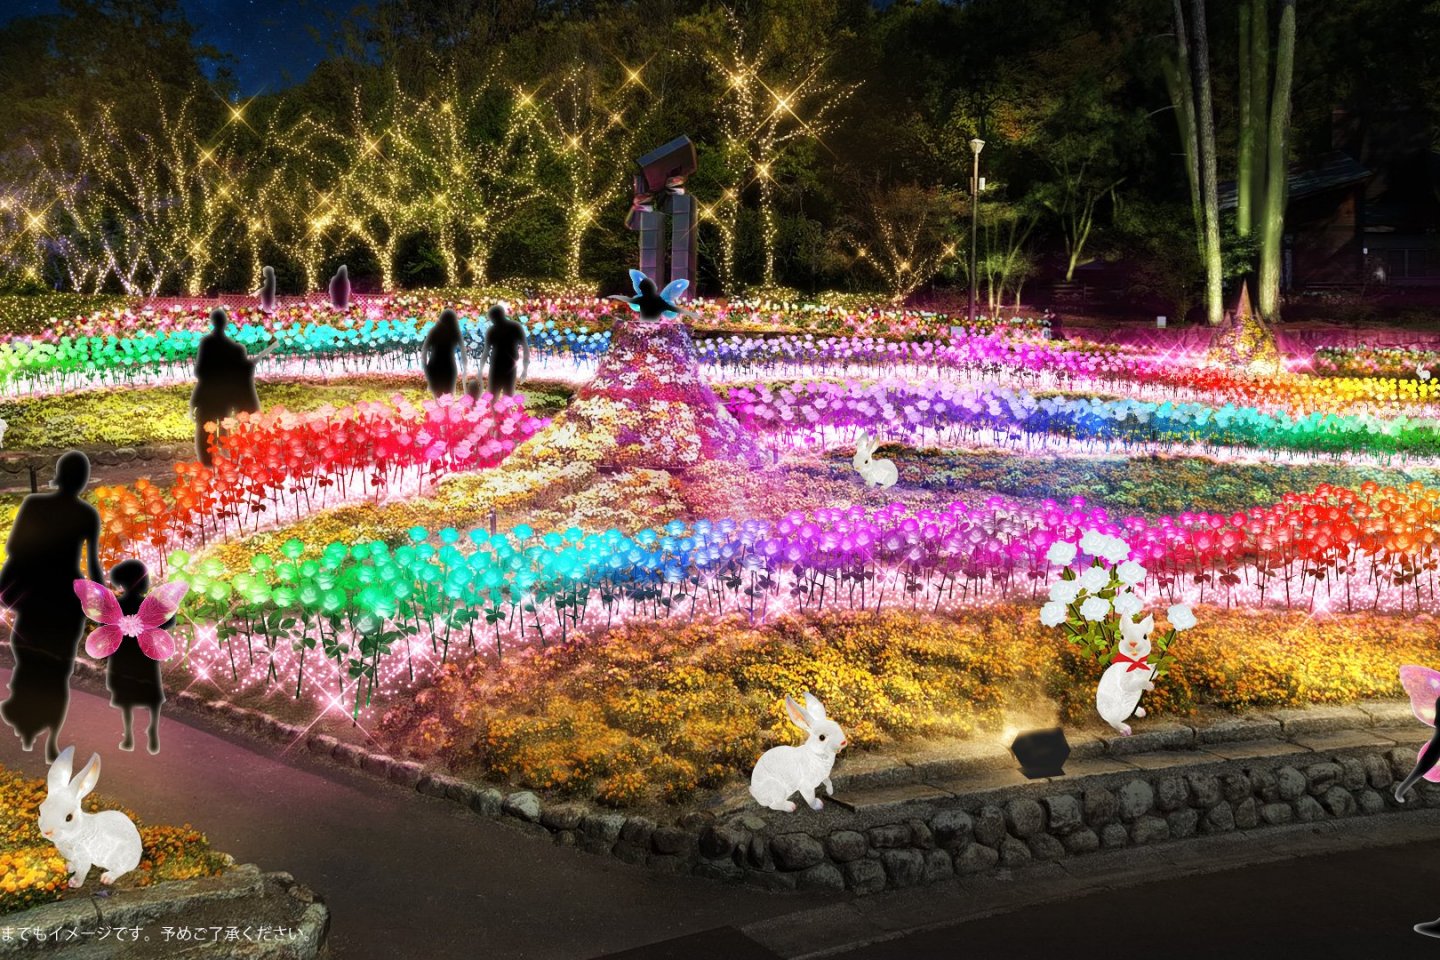 The grounds will sparkle with approximately 300,000 LED lights